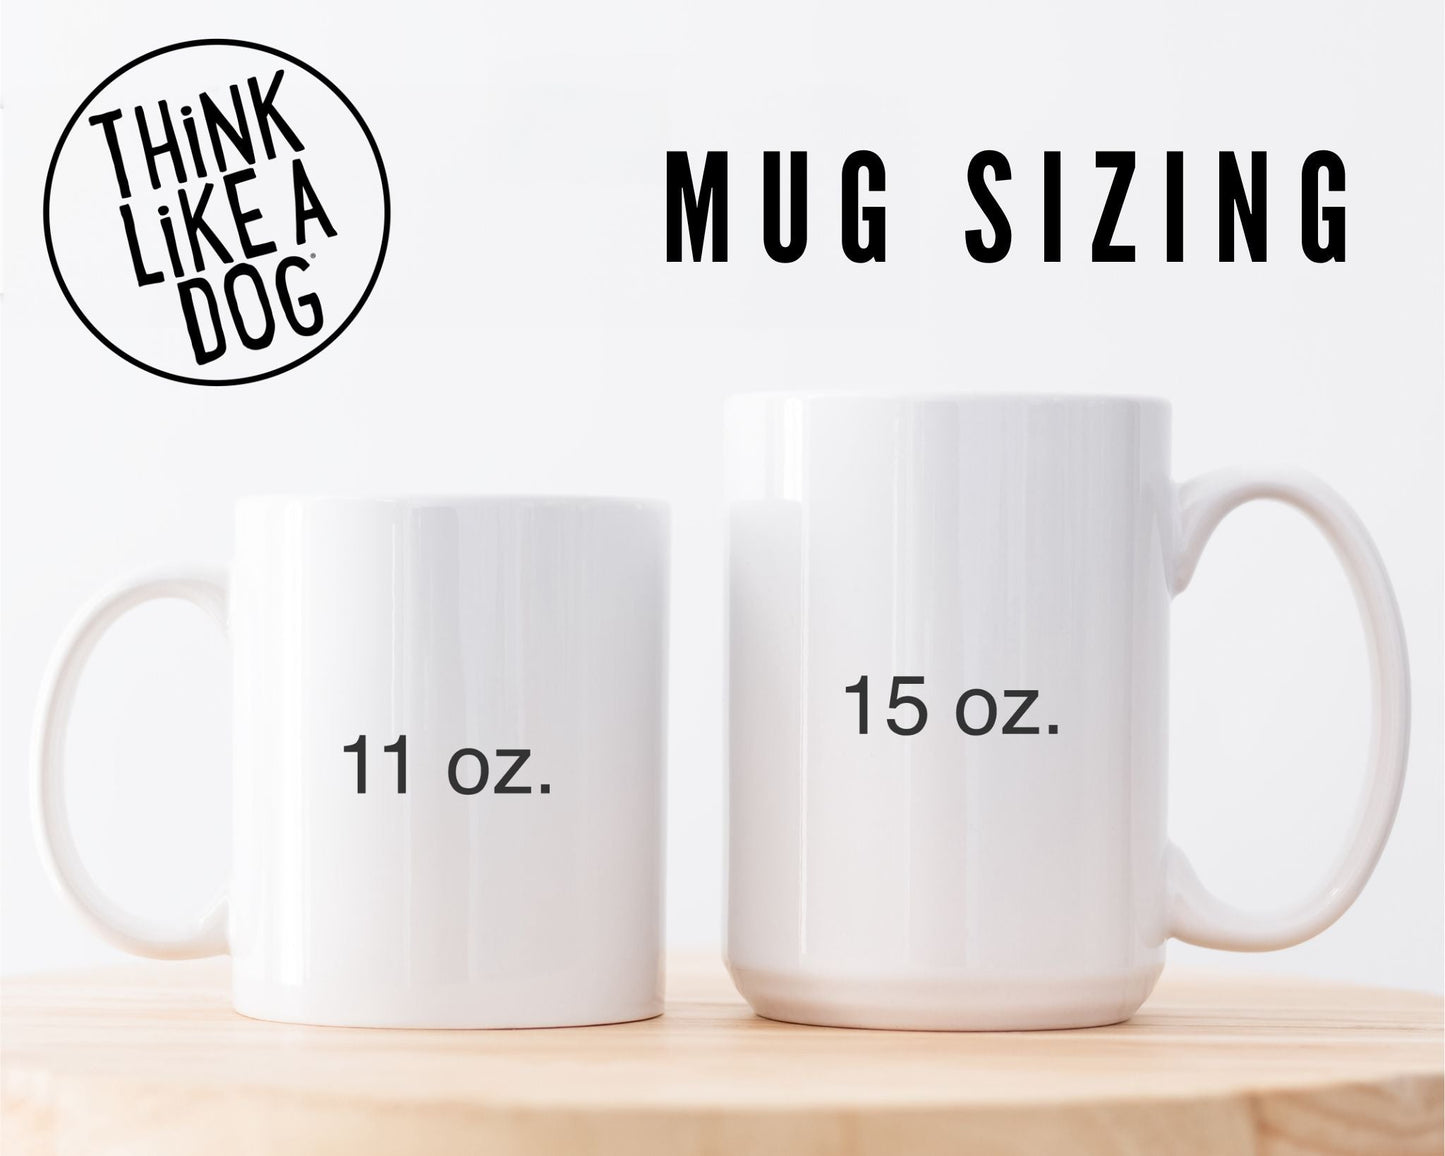 Two White Glossy Mug Live Your Life. Not The Other Dog's with handles on a wooden surface, labeled "11 oz." and "15 oz." respectively, with text above reading "think like a dog - mug sizing.